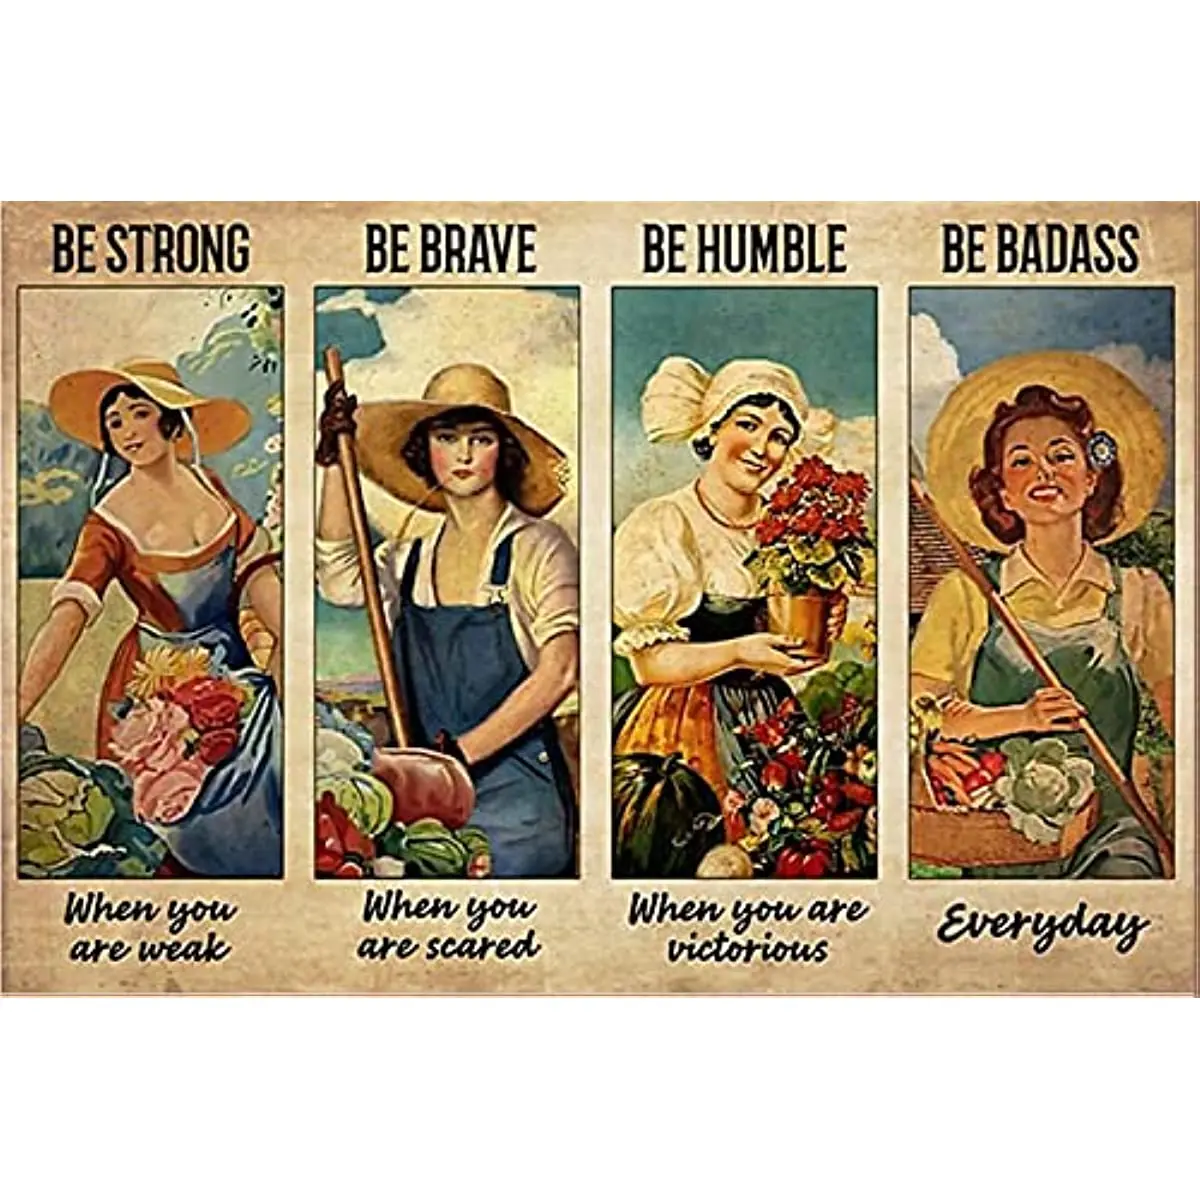 

Rustic Metal Tin Sign Farmer Girl Wall Art Be Strong When You Are Weak Be Brave When You Are Scared Be Humble 12x16 Inch